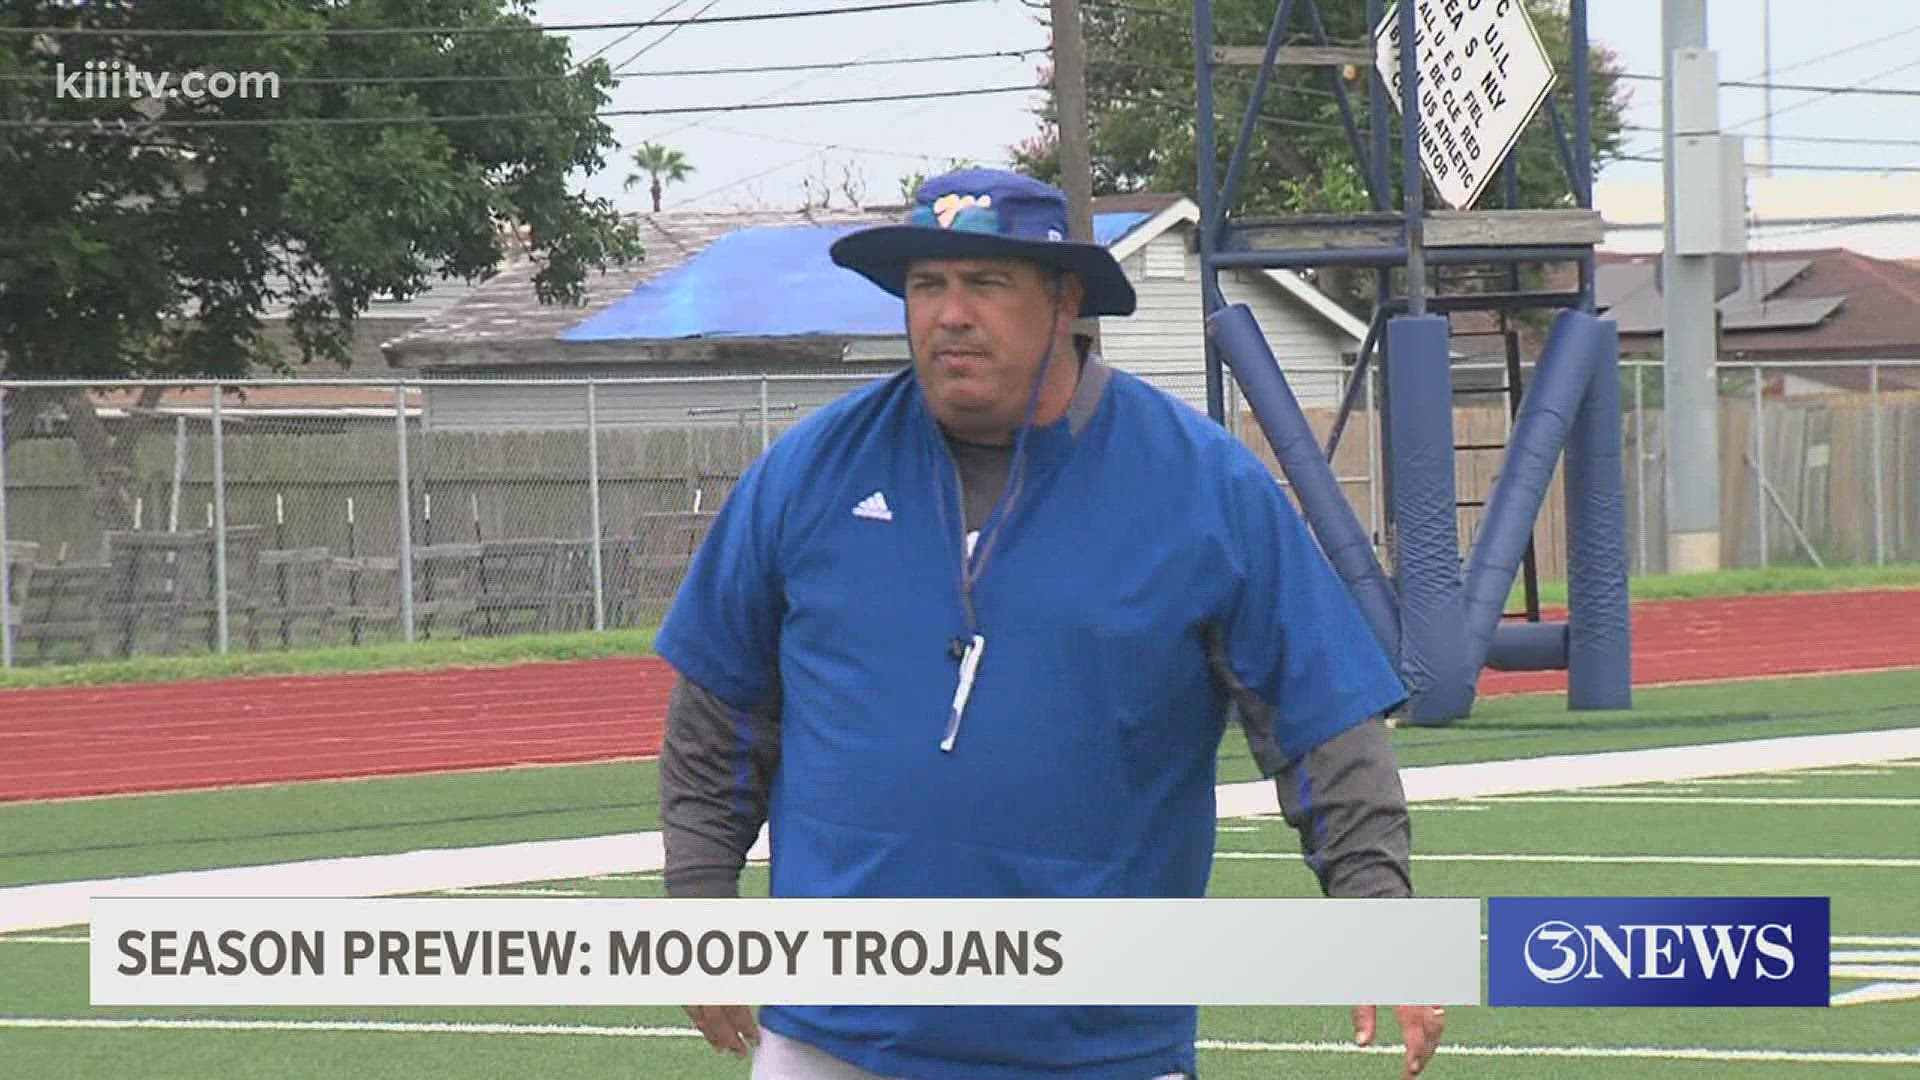 Coach Mike Cantu is hoping the trio of Dequwan Lindsey, Nathaniel Sada and Darrell Nation can get the Trojans back in the playoff picture in 2021.